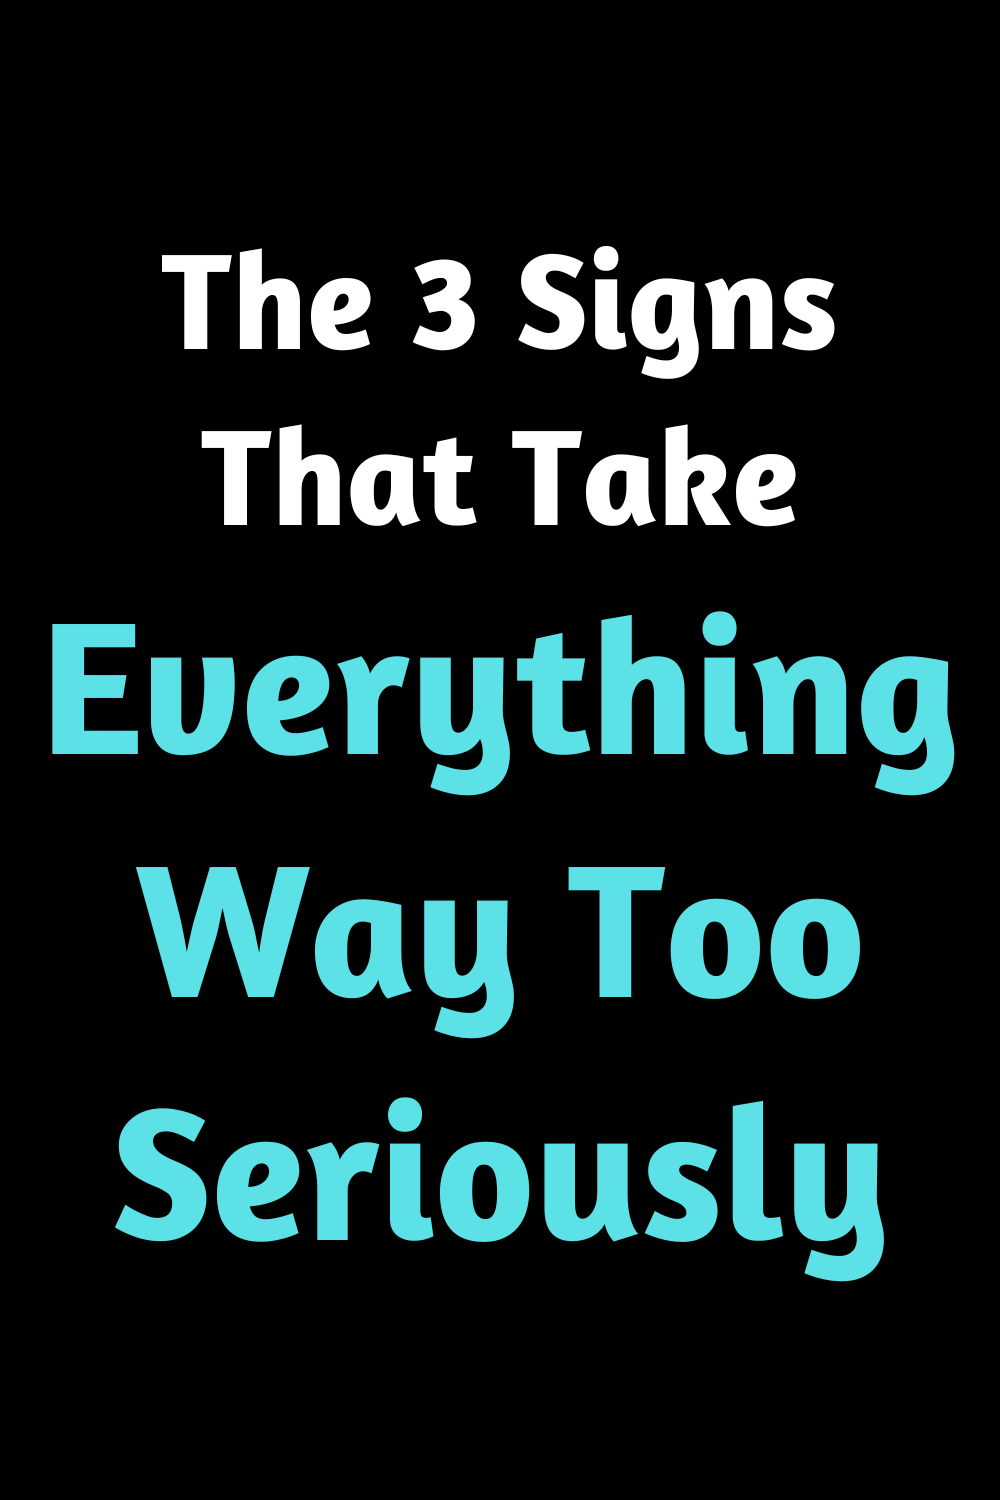 The 3 Signs That Take Everything Way Too Seriously